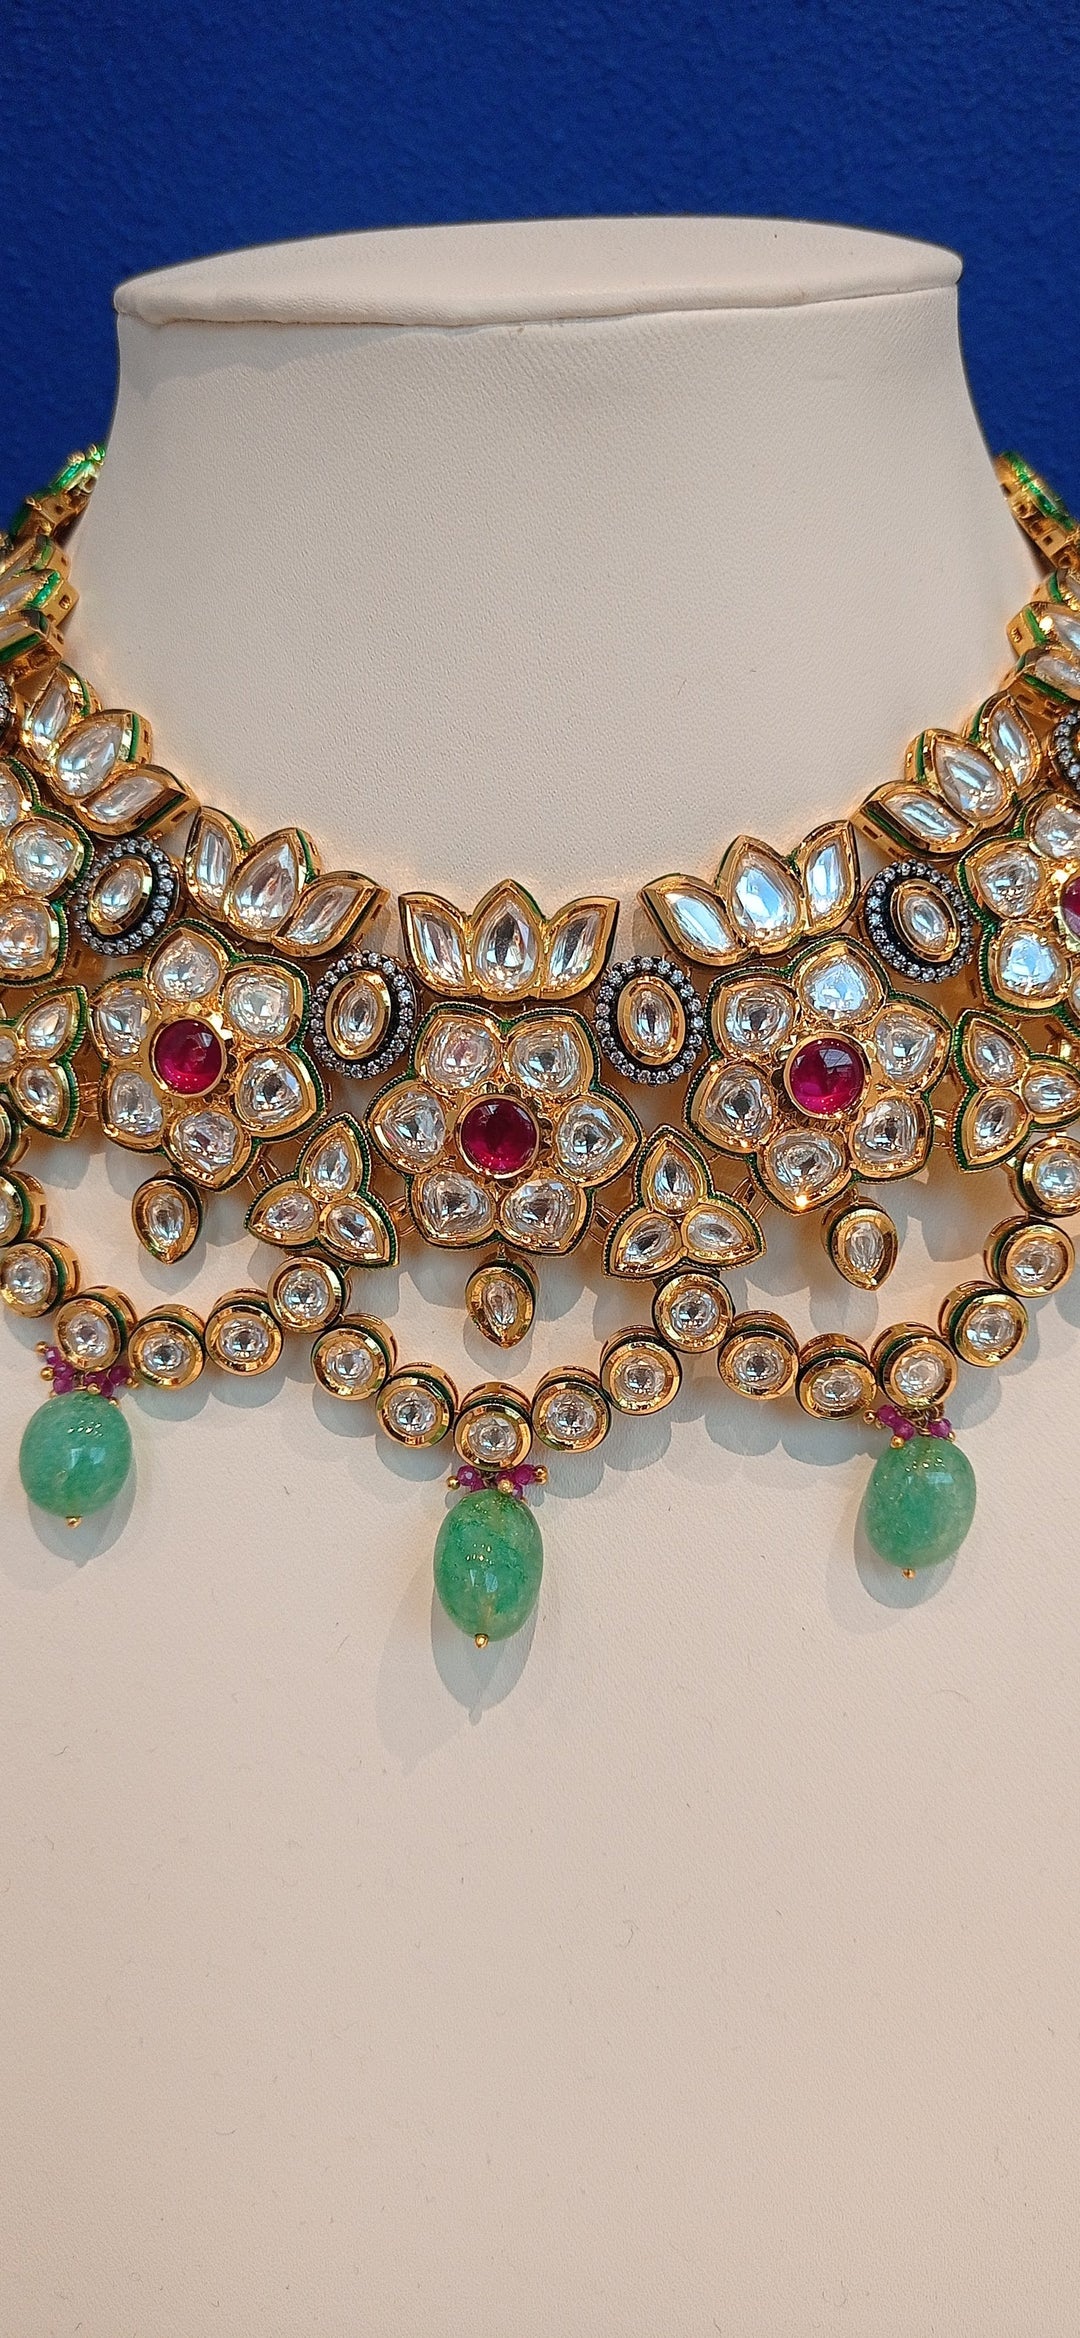 Syrah Kundan Floral Ruby and Emerald Beaded Necklace and Earrings Indian Bridal Wedding Set